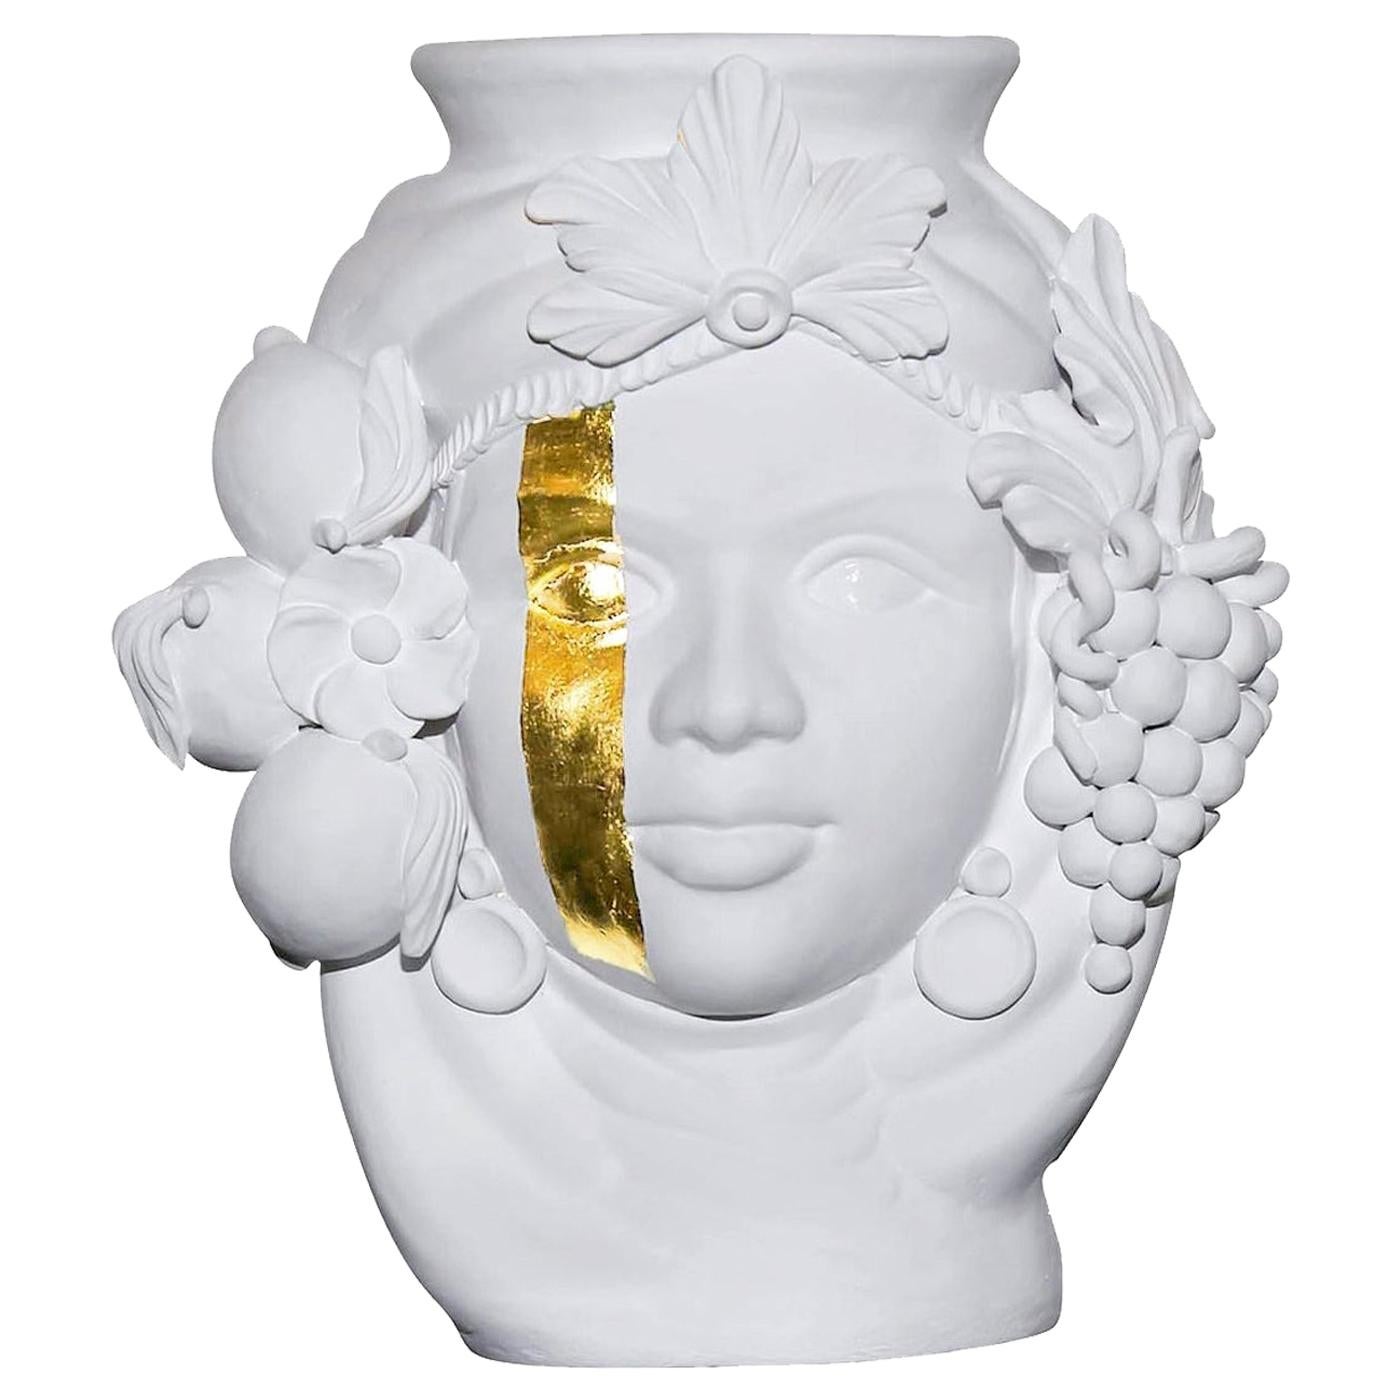 In stock in Los Angeles, Gold / White Vase, by Stefania Boemi, Made in Italy For Sale